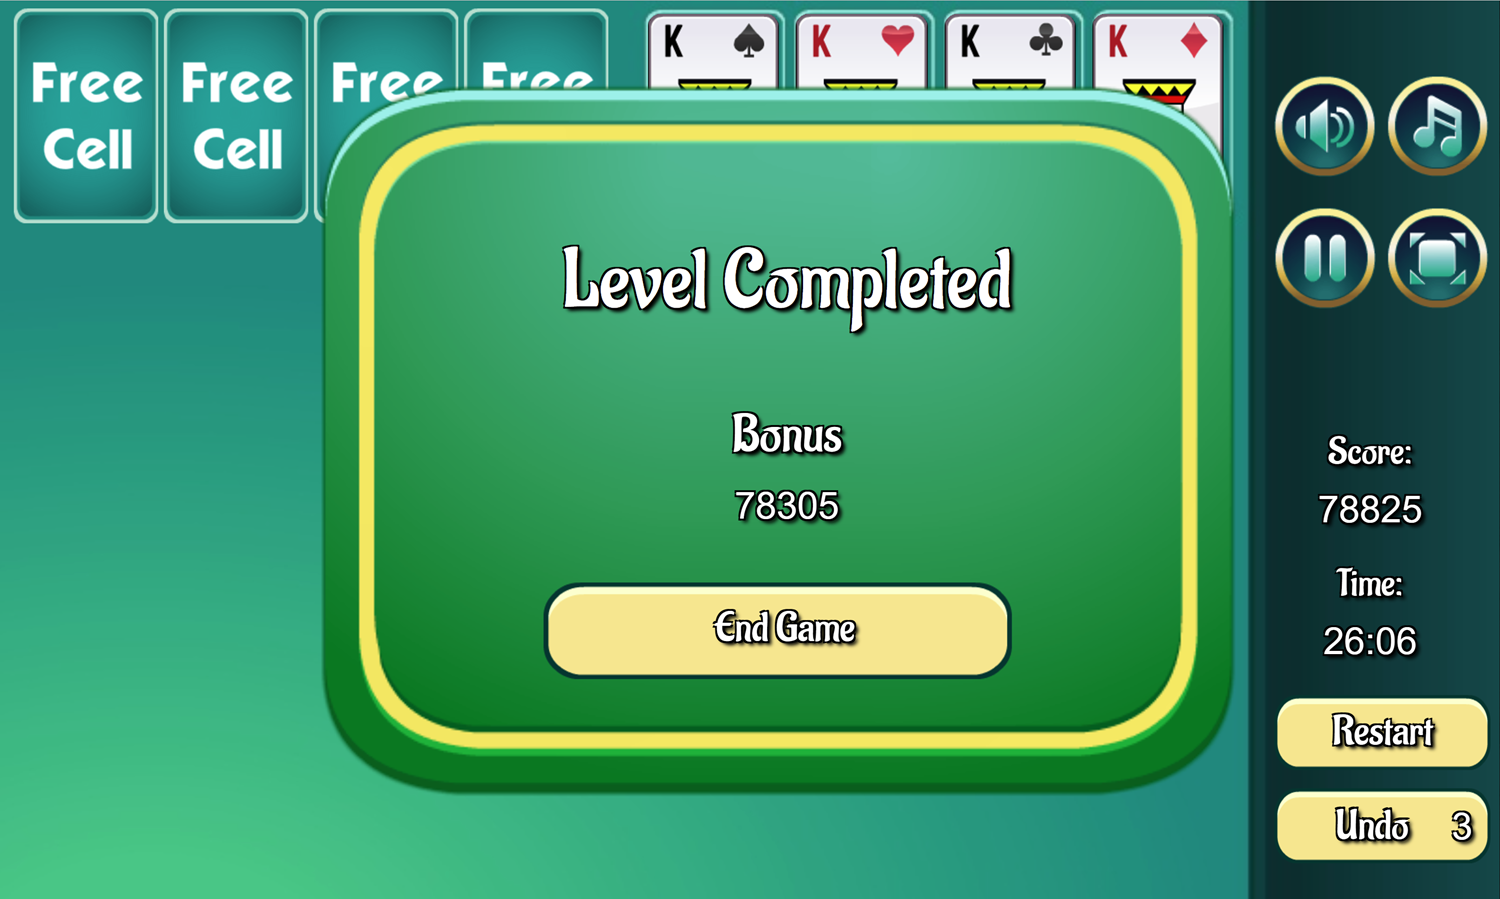 Blind Freecell Game Level Complete Screen Screenshot.